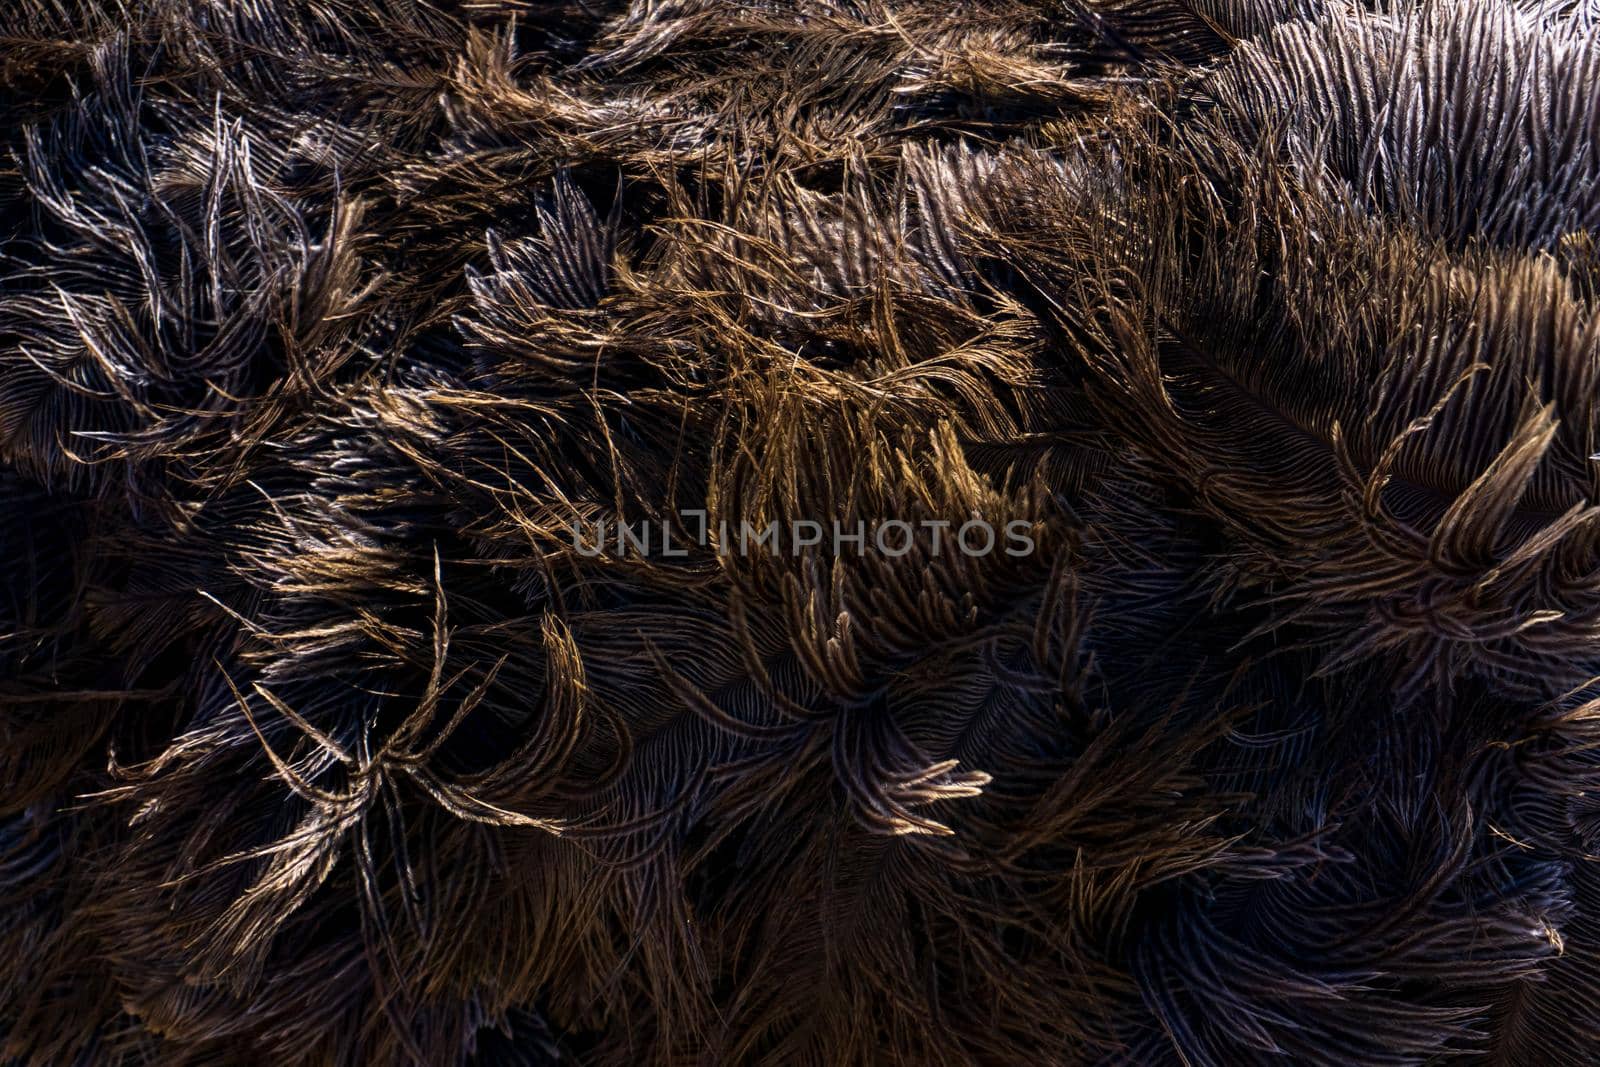 Brown ostrich feathers and down background close up